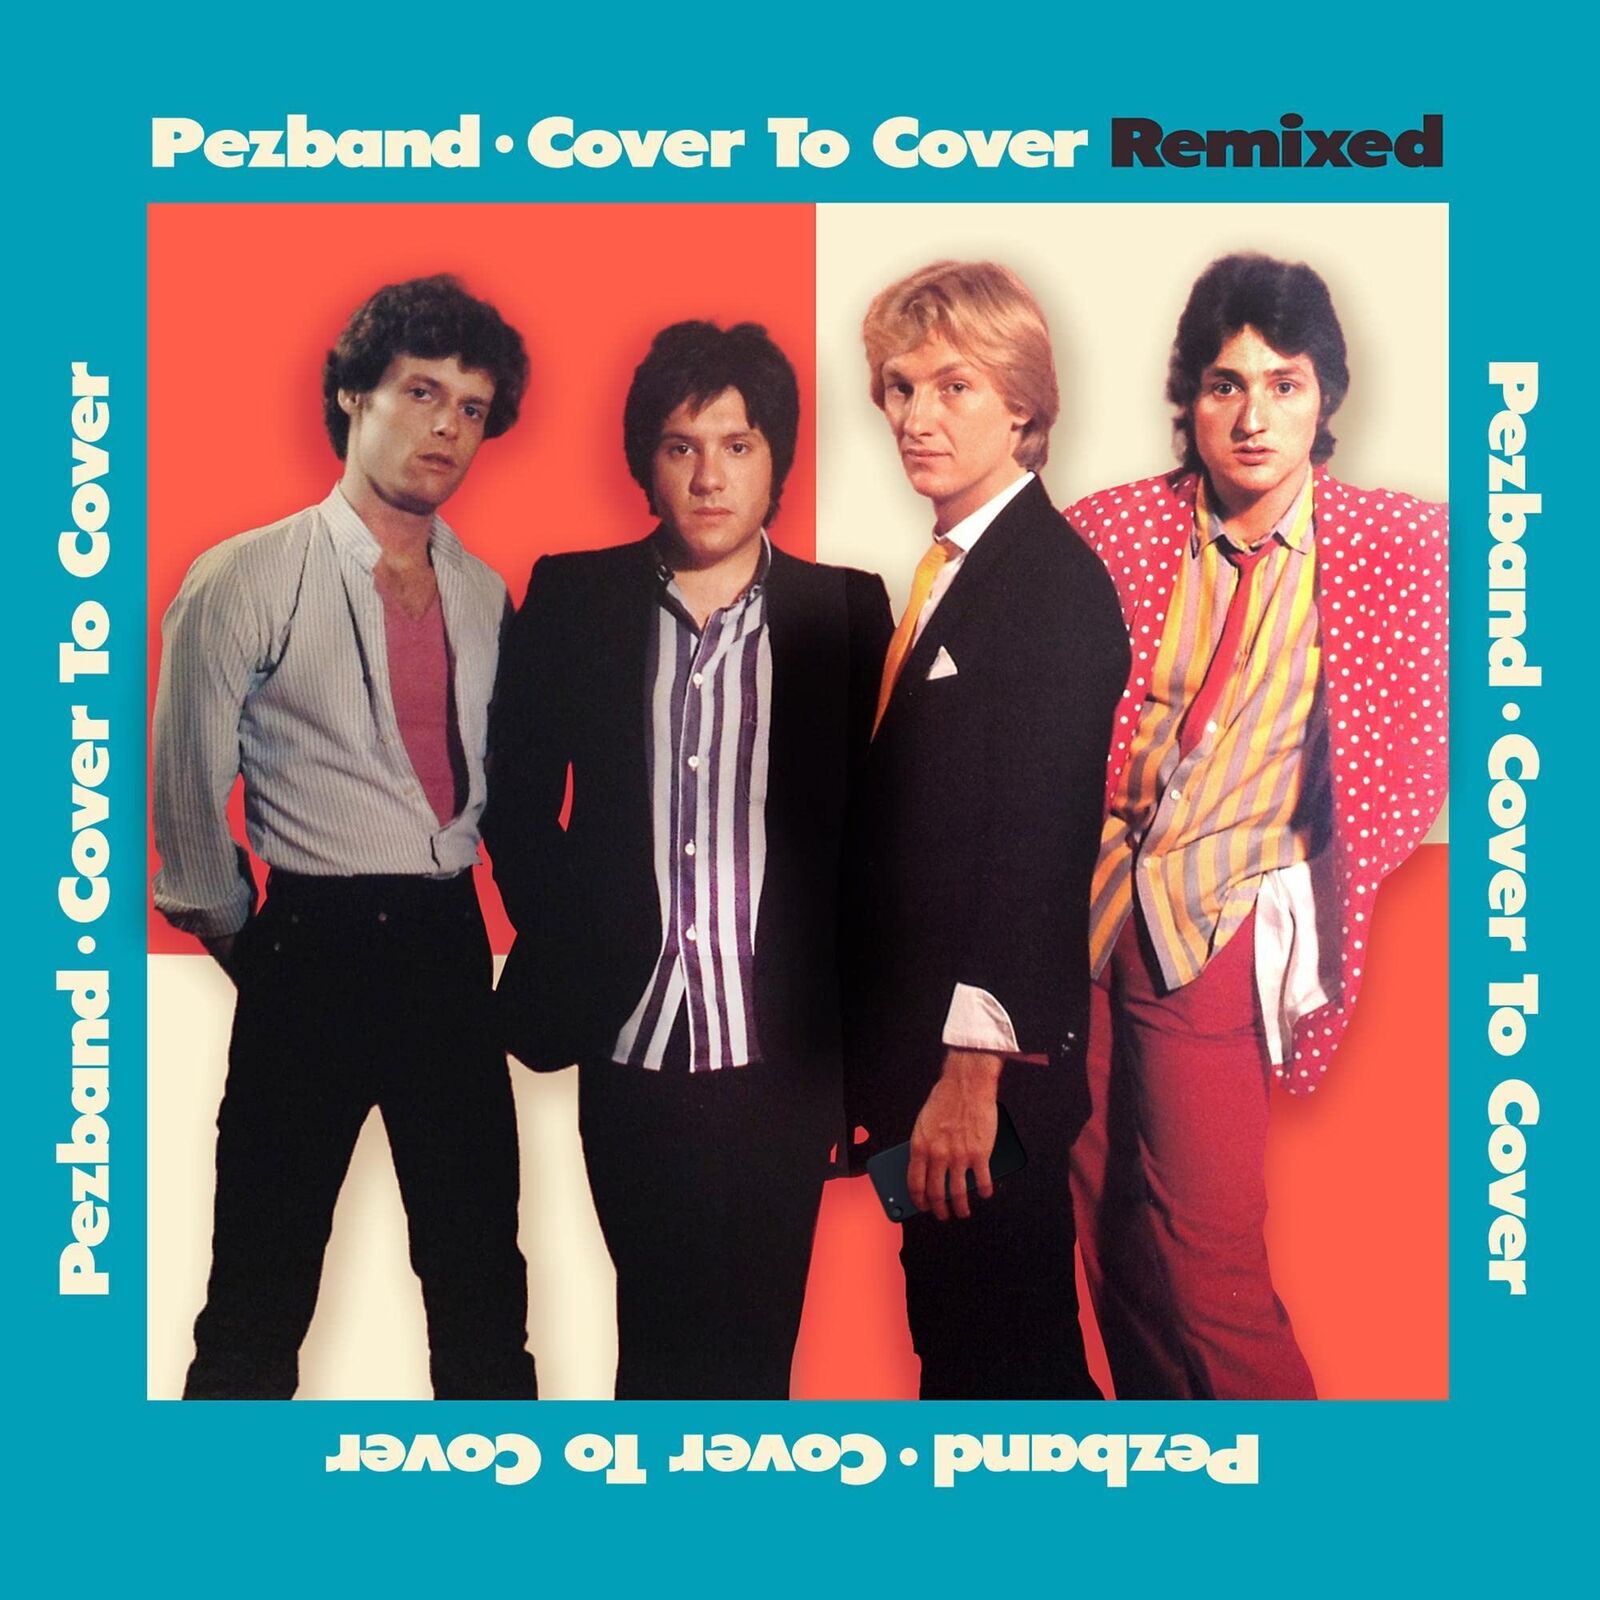 Pezband Cover To Cover Remix (CD)